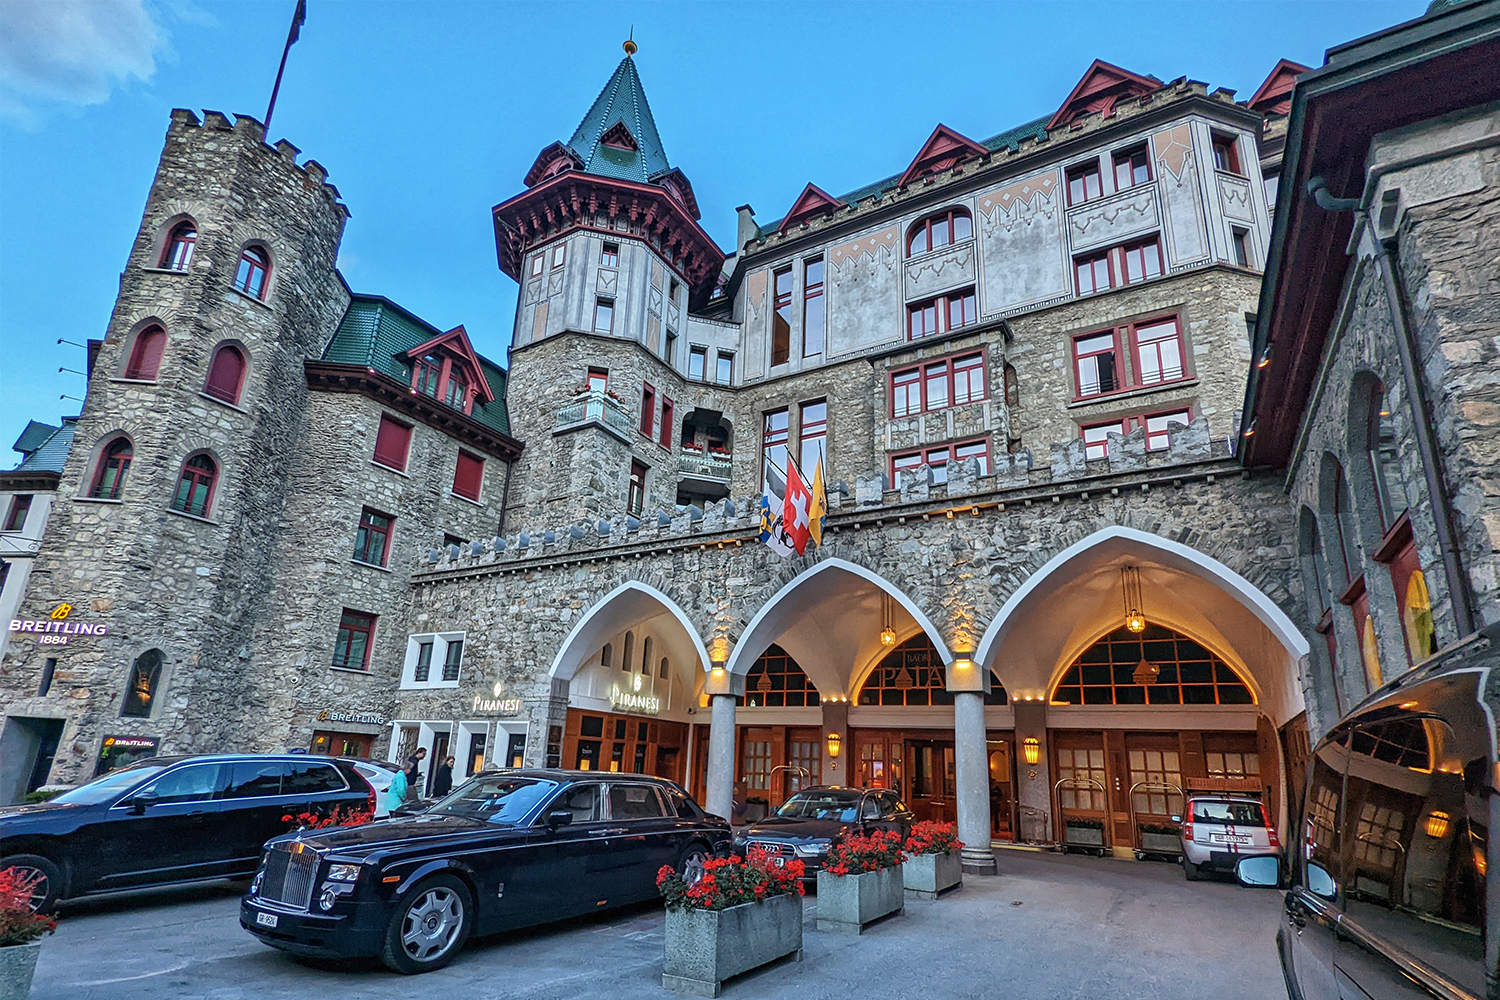 The entrance to Badrutt's Palace in St. Moritz, Switzerland